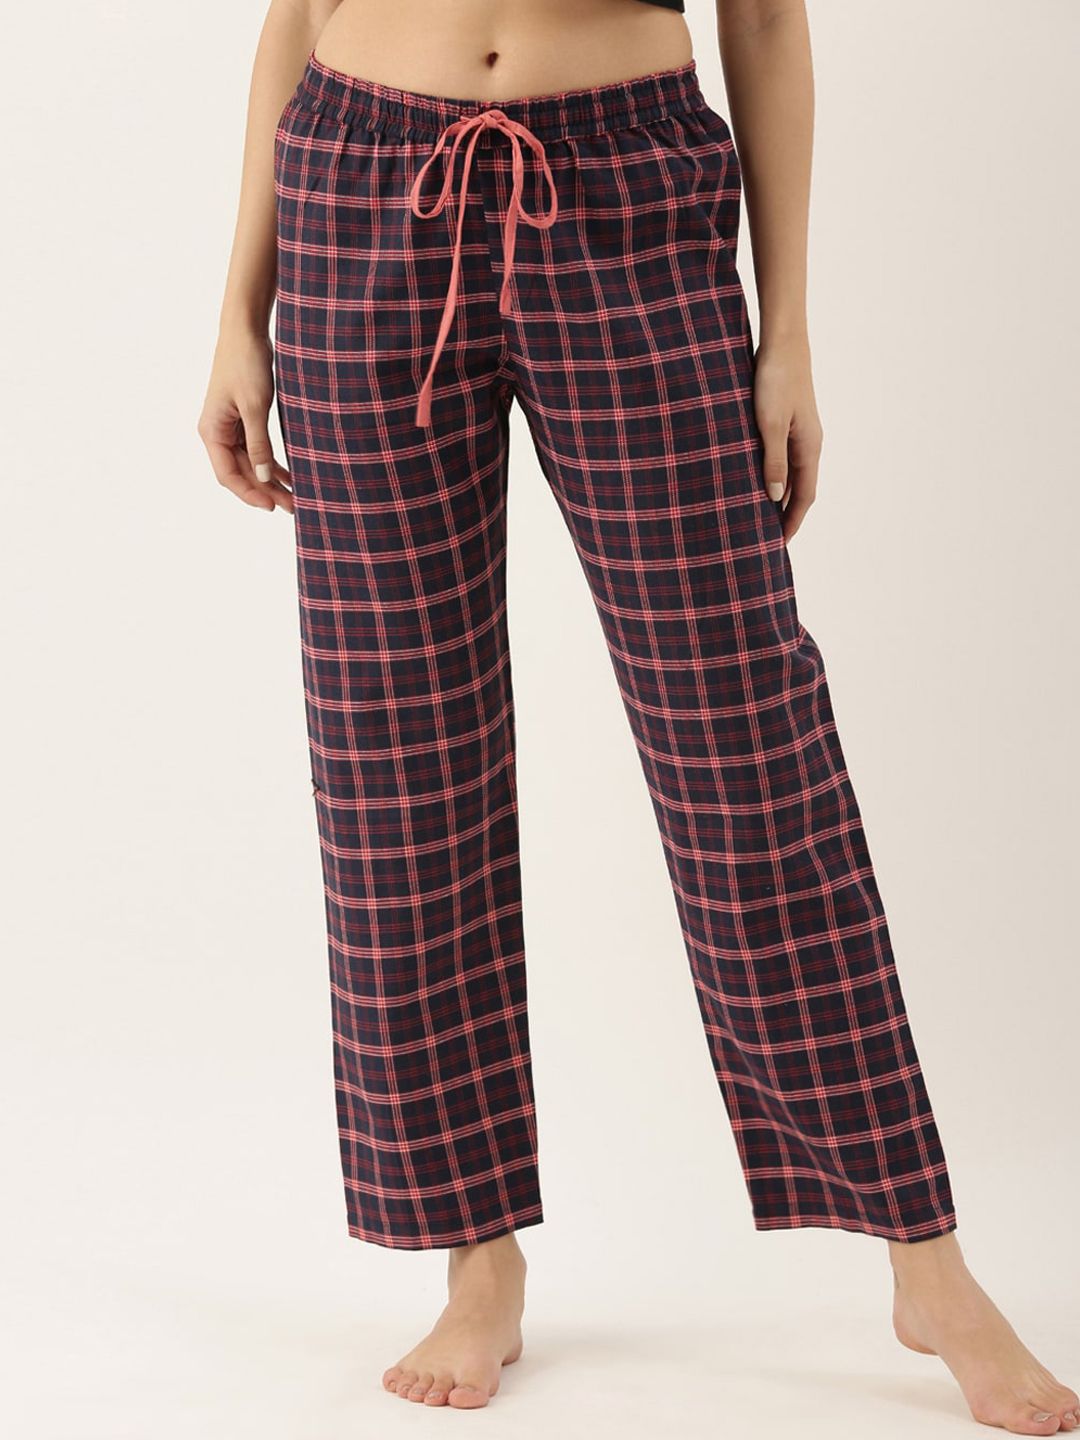 Bannos Swagger Women Black & Red Checked Lounge Pants Price in India